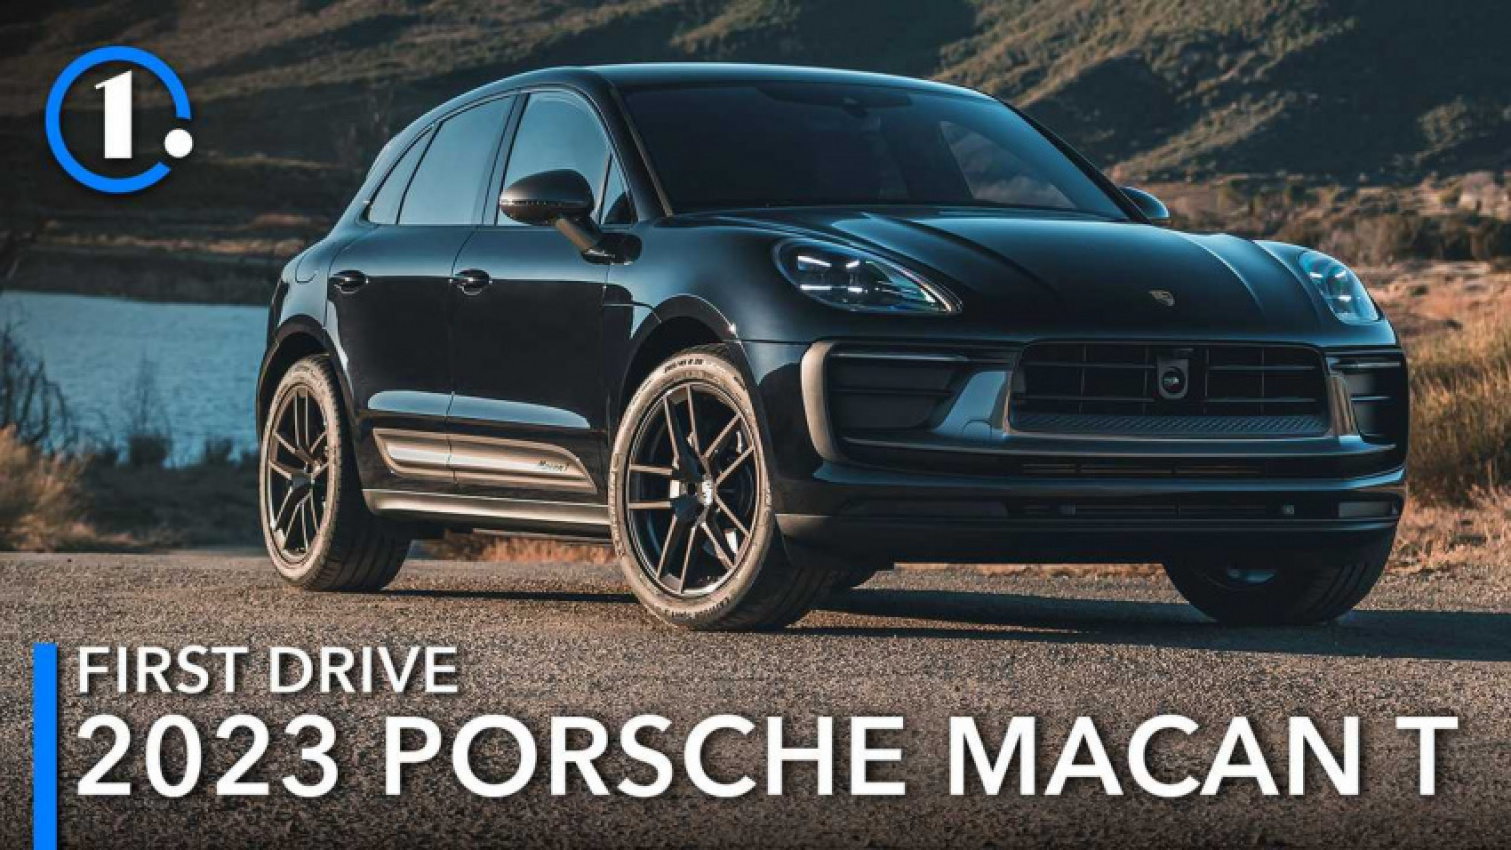 2023 Porsche Macan T First Drive Review Touring Is The Hot Ticket